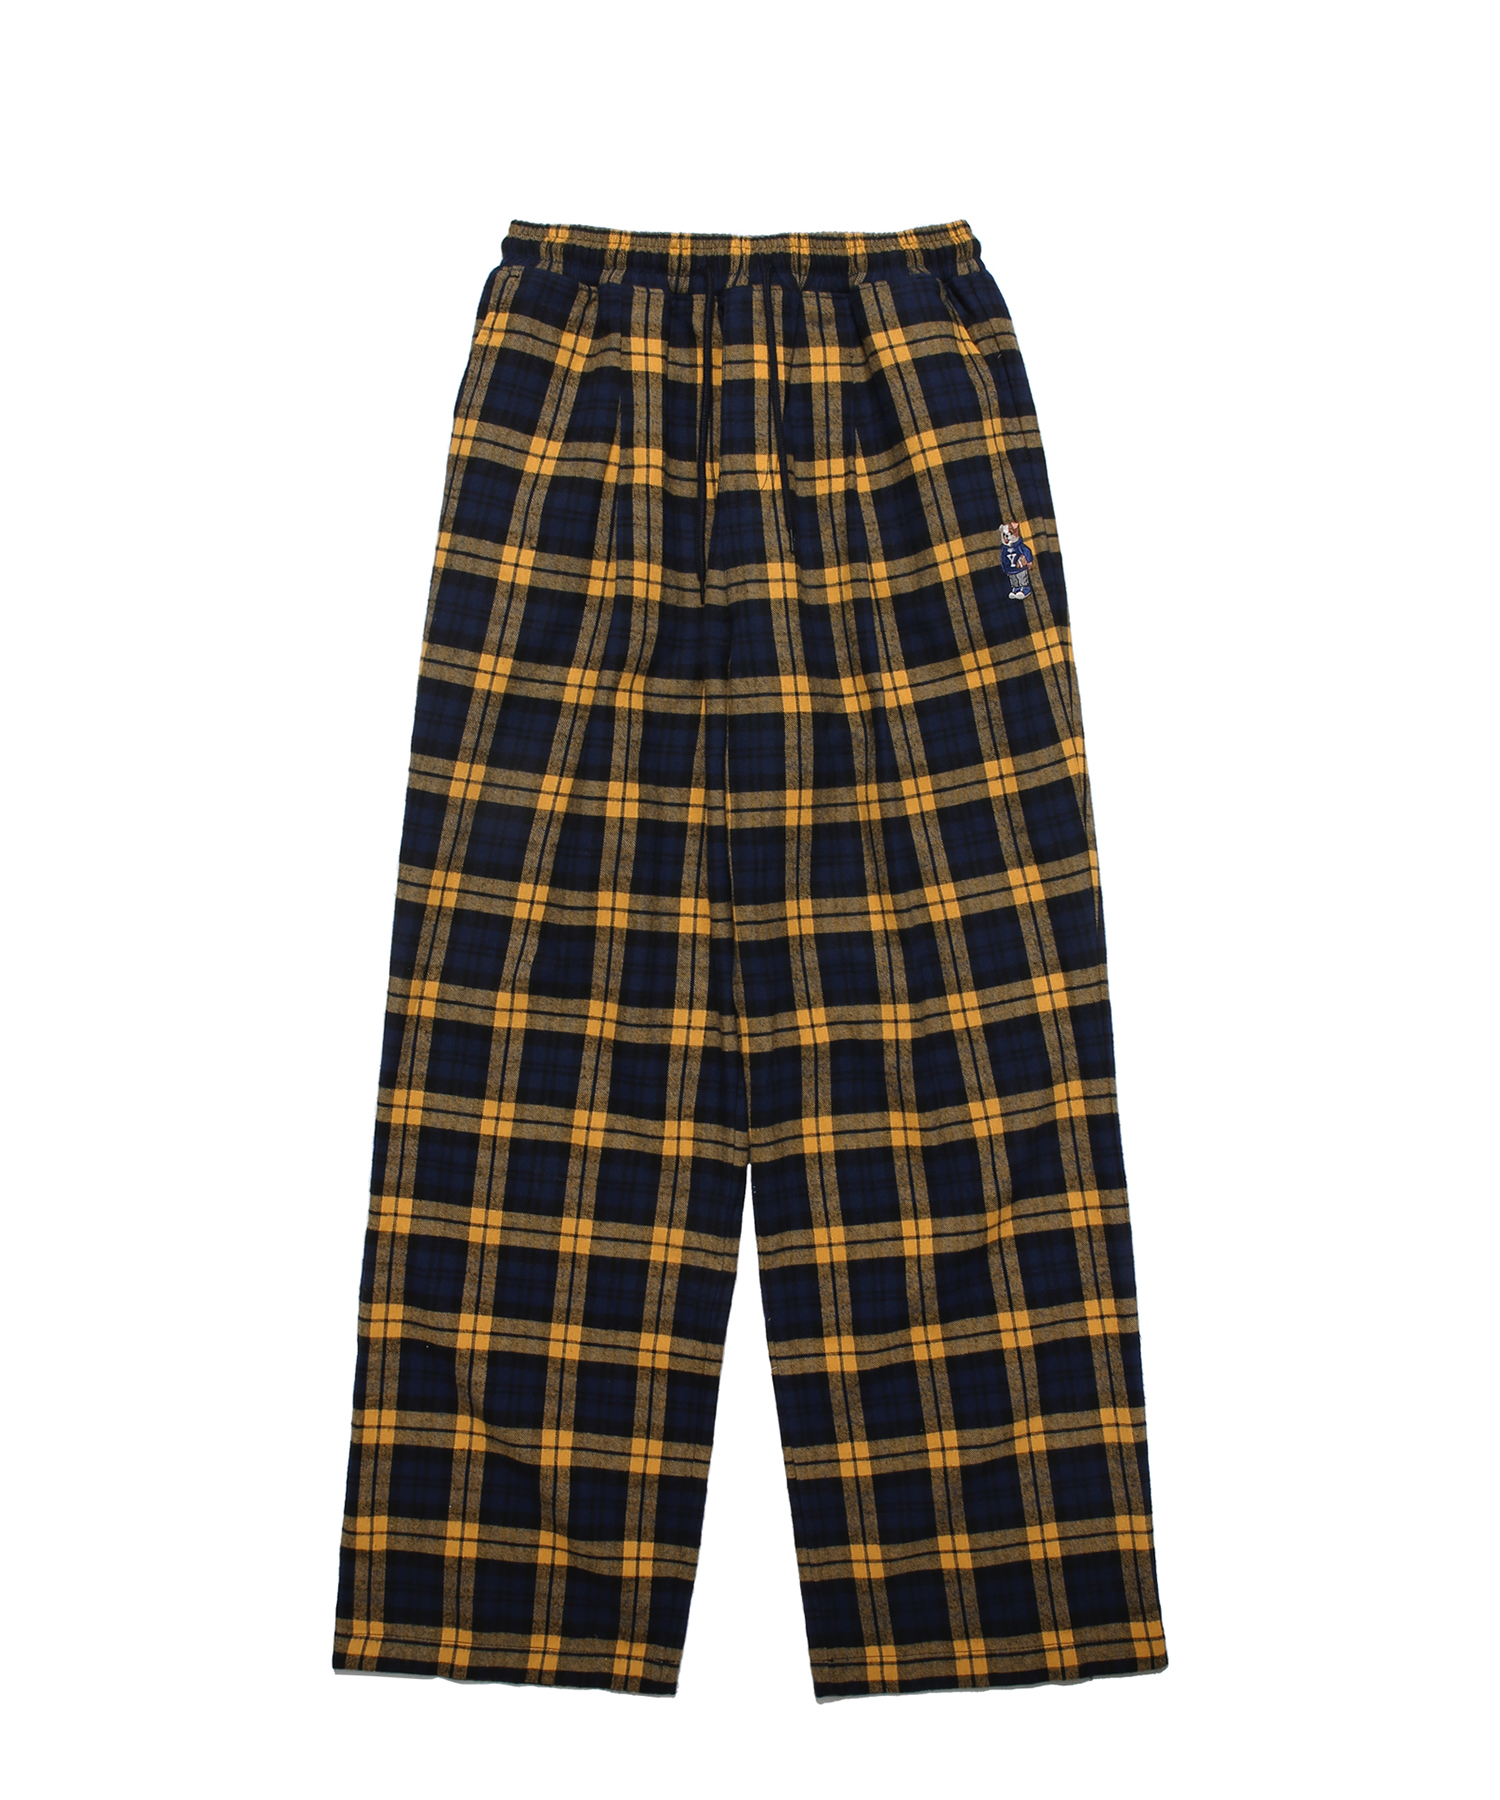 EMBROIDERY UNIVERSITY DAN FLANNEL CHECK EASY PANTS YELLOW